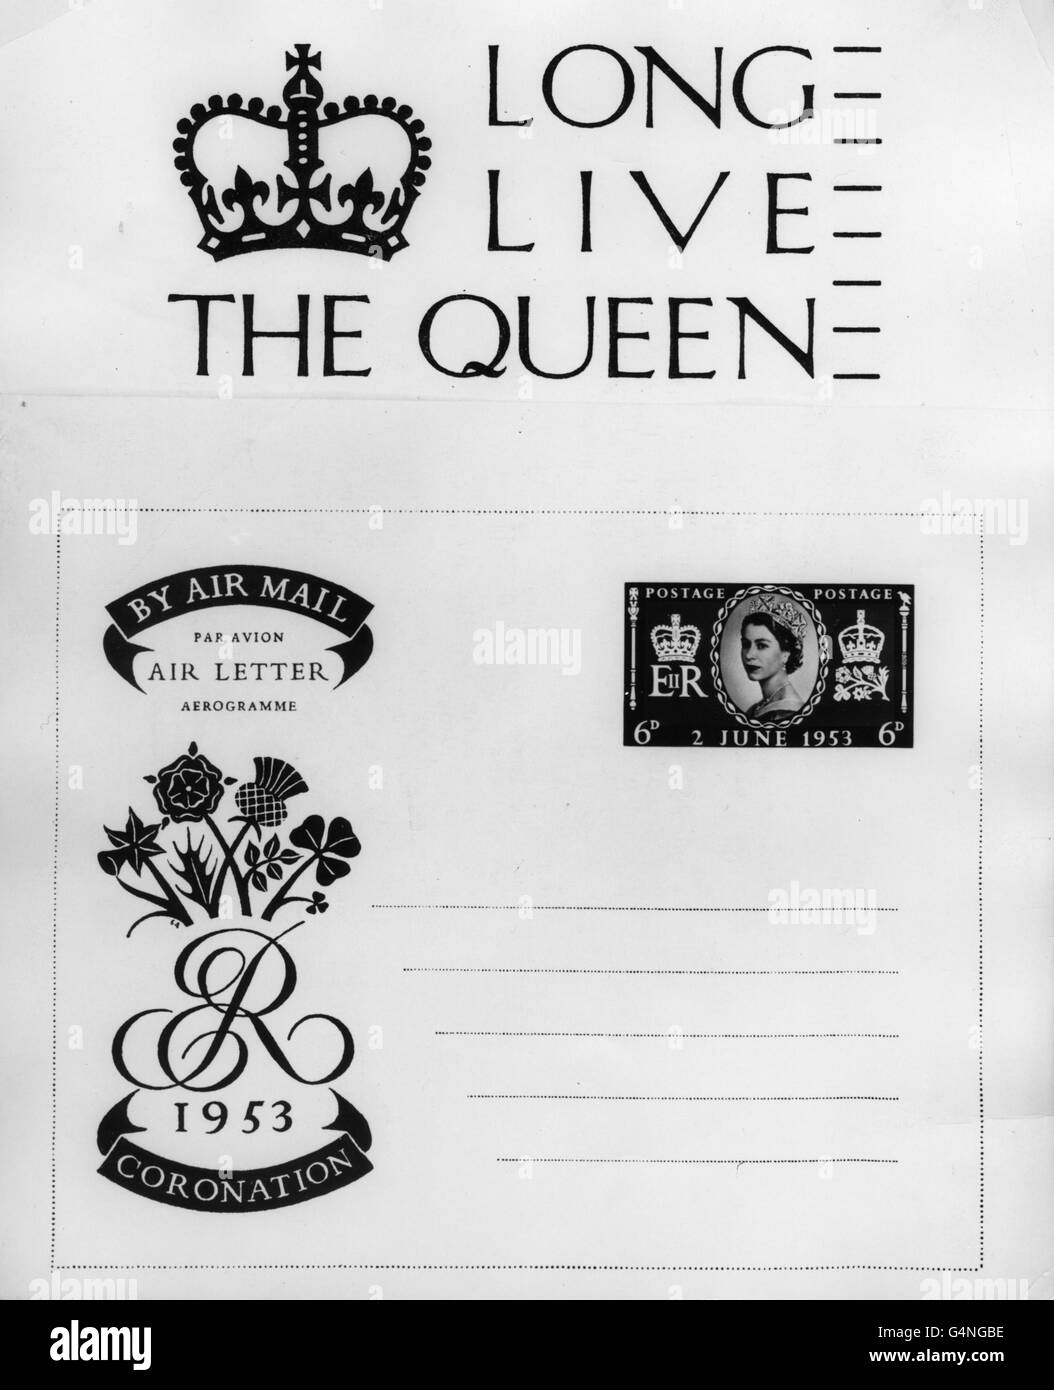 The special postmark and Air Letter form which were introduced by the Post Office to commemorate the Coronation of Queen Elizabeth II. Stock Photo